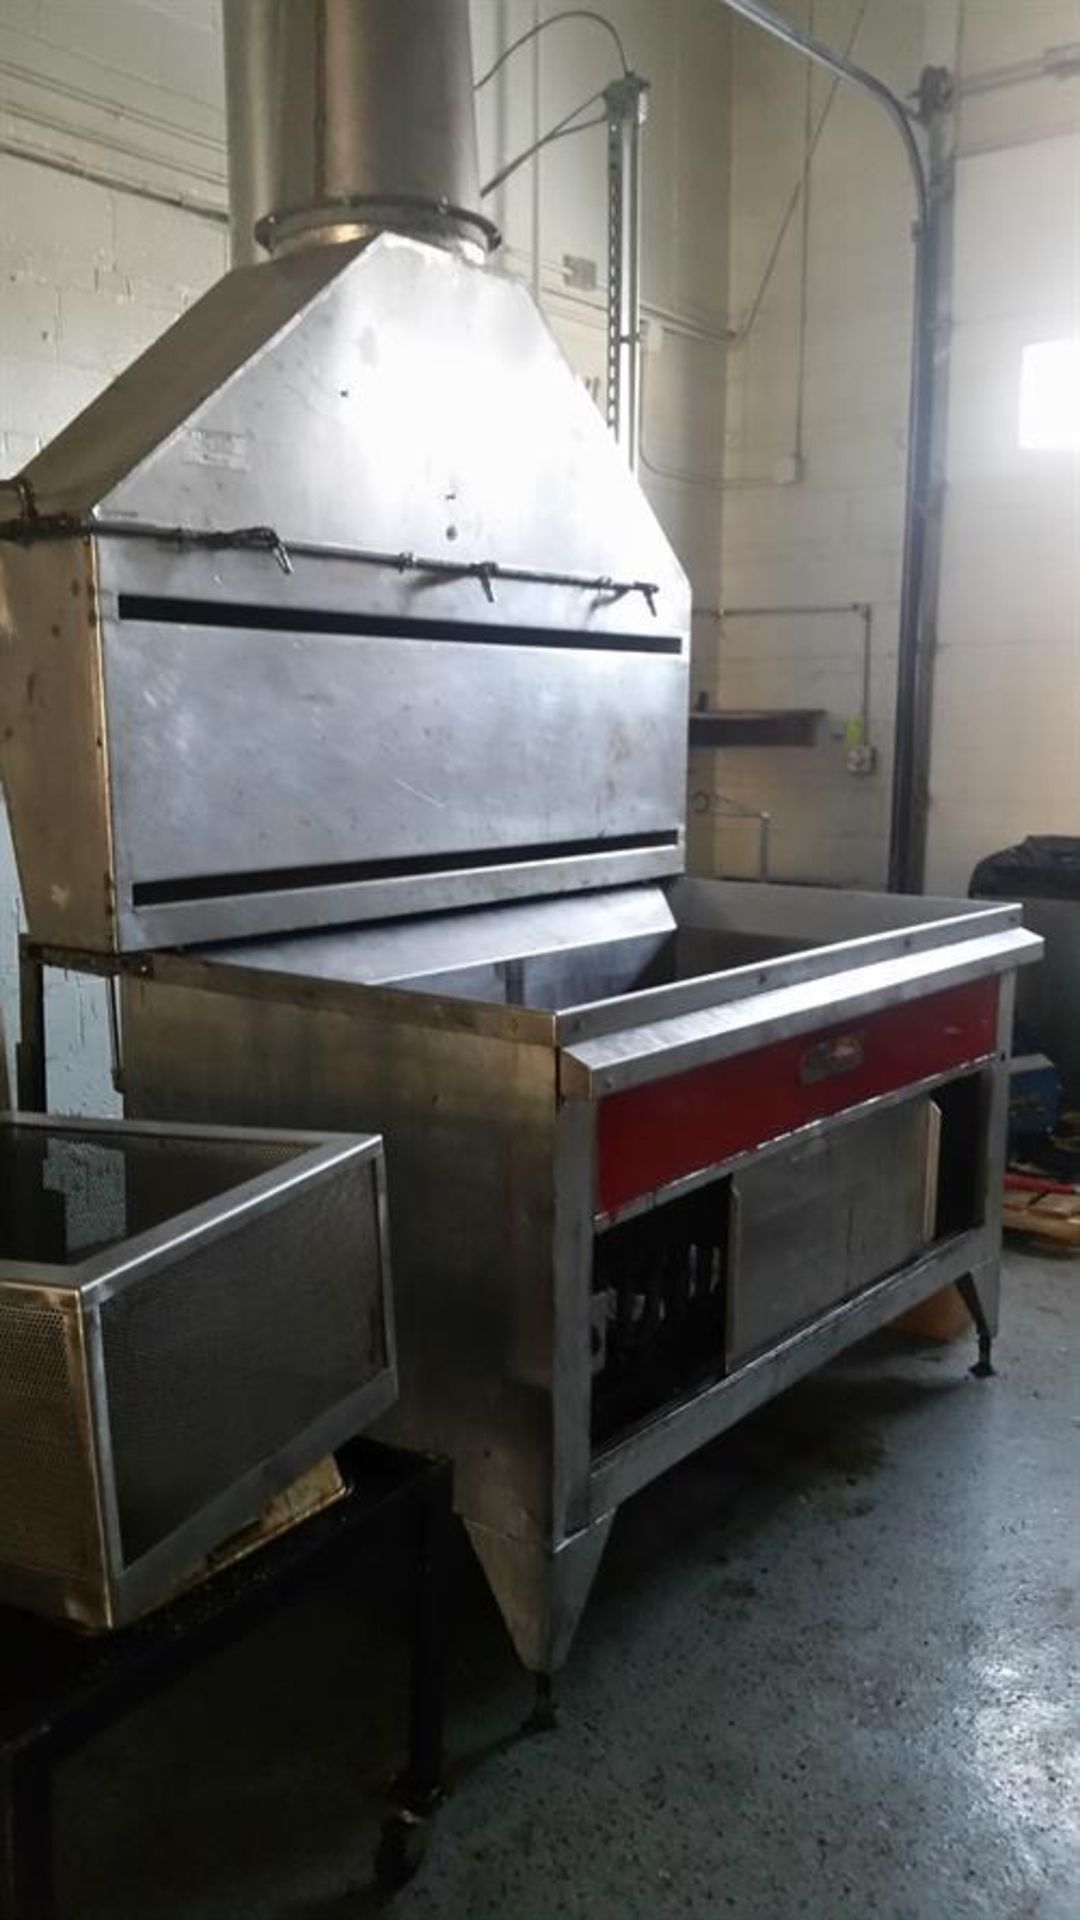 Pitco Mastermatic Gas Fired Basket Fryer - Modle HD54SF - 24" x 54" fry area - (2) Baskets with